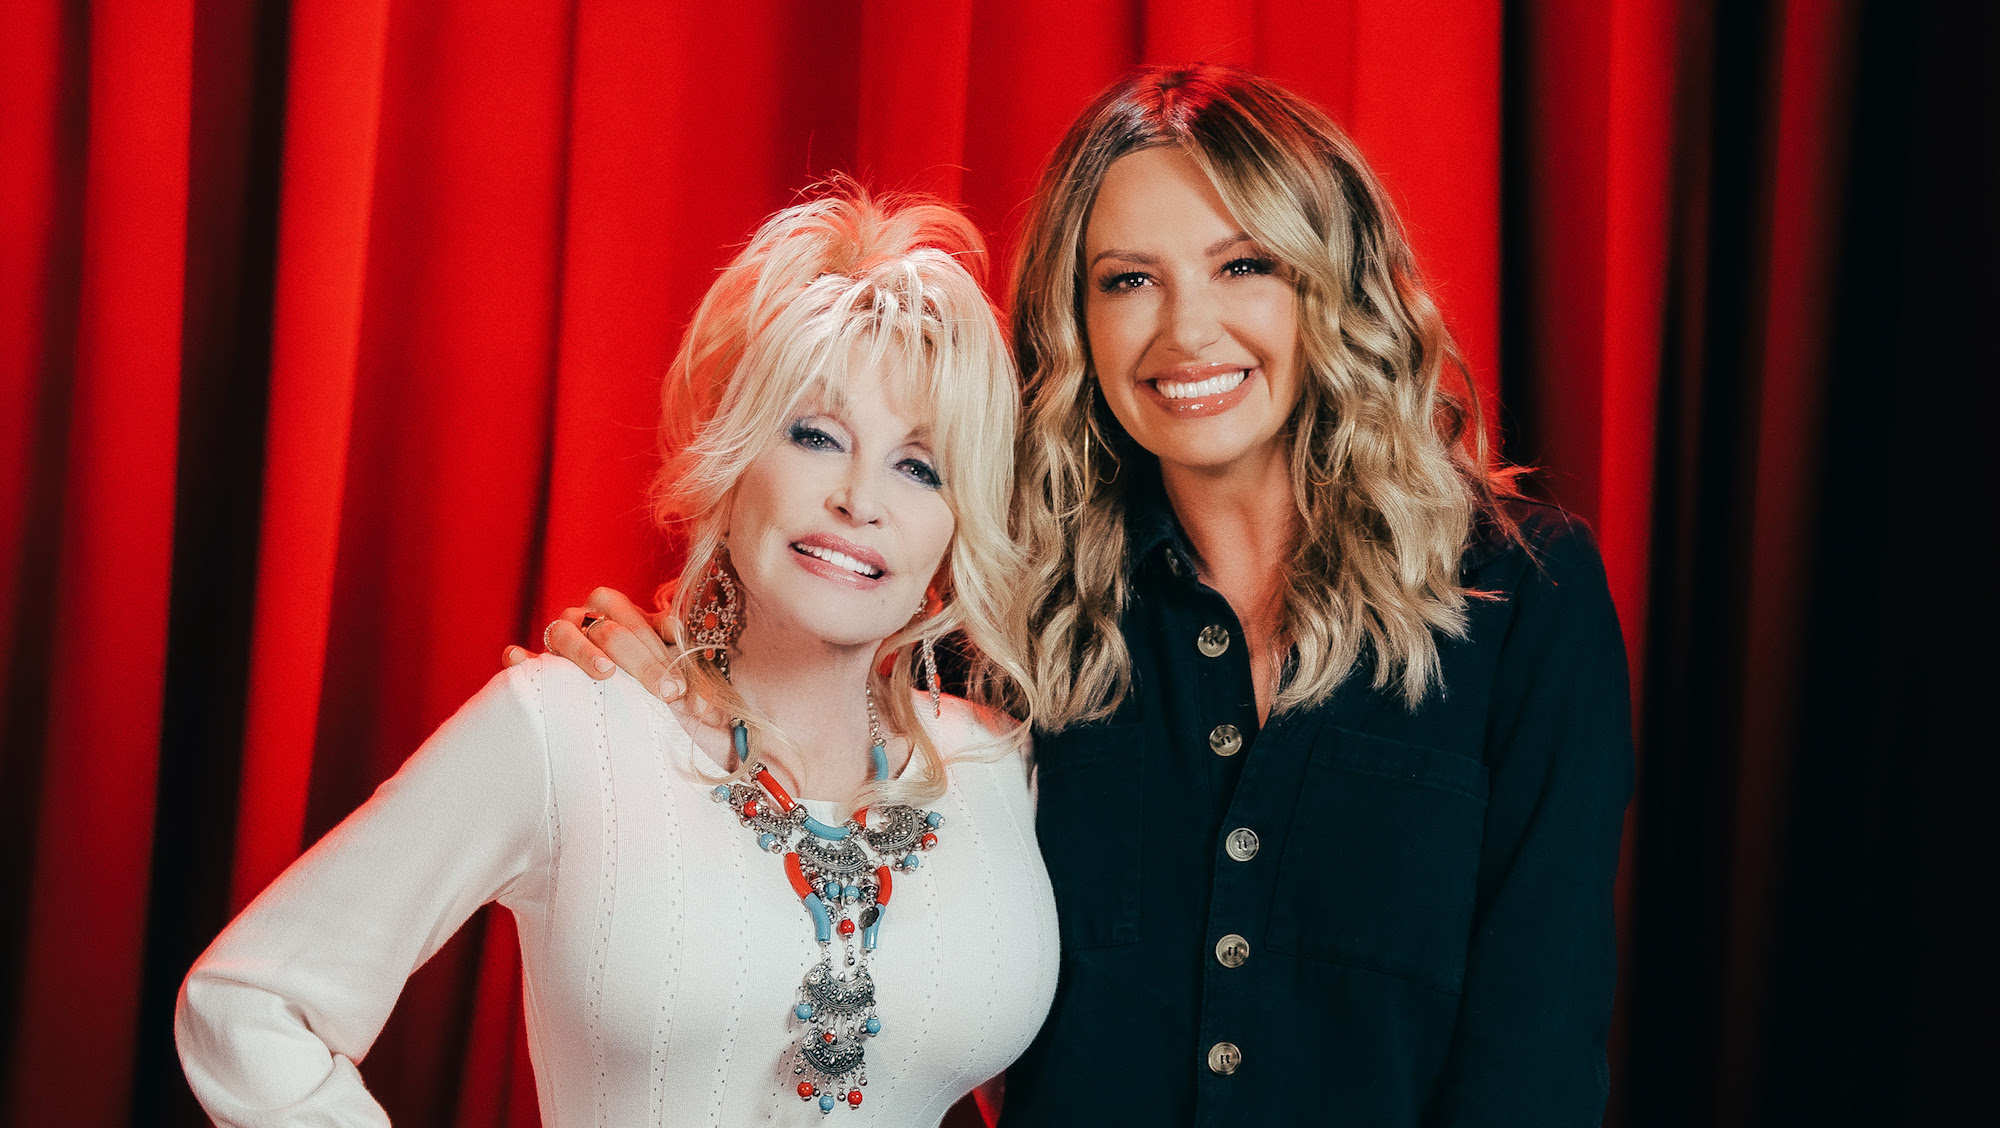 Dolly Parton Surprises Carly Pearce with Invitation to Join the Grand Ole Opry